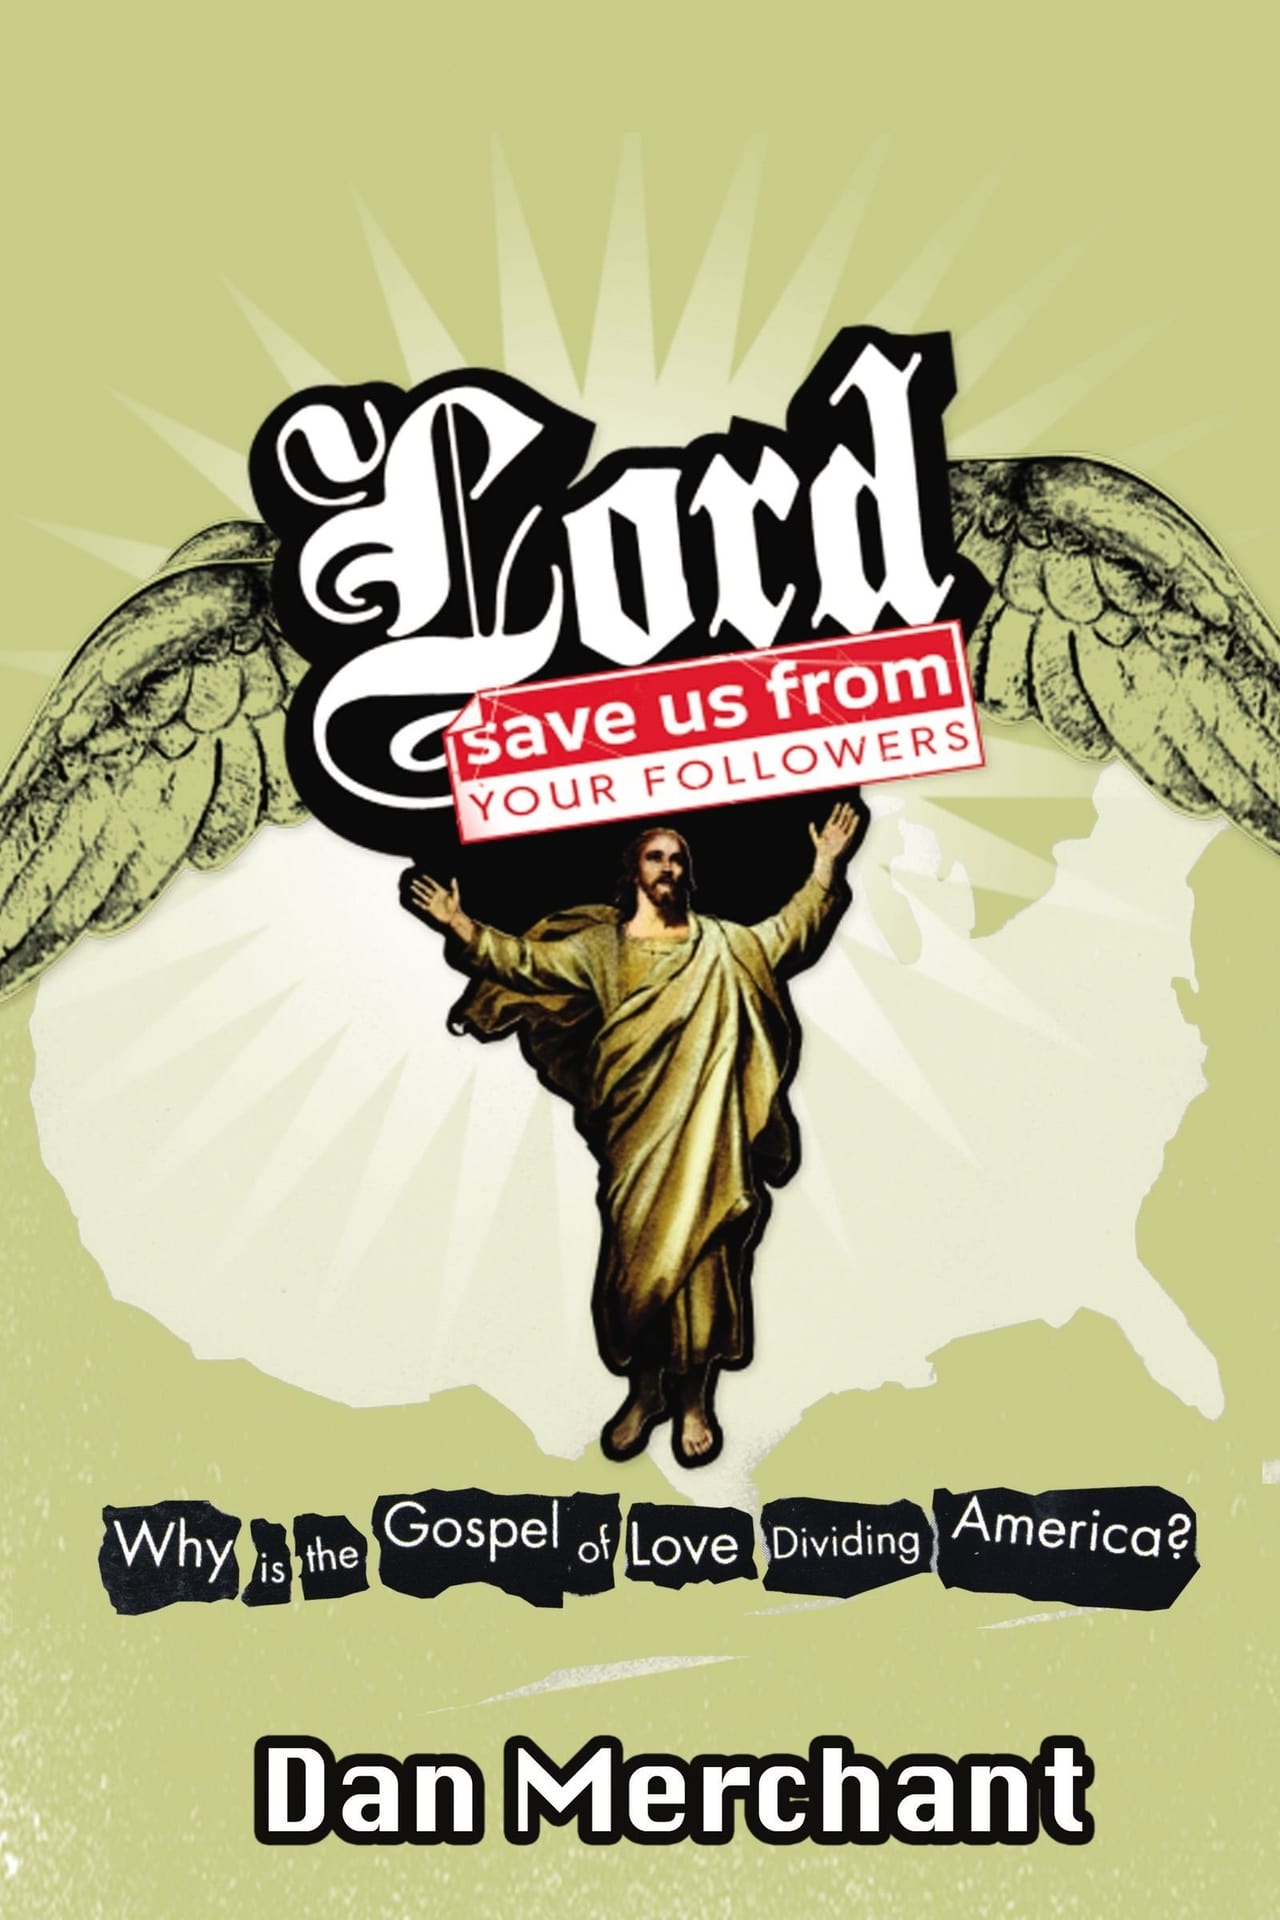 Lord, Save Us from Your Followers (2008)